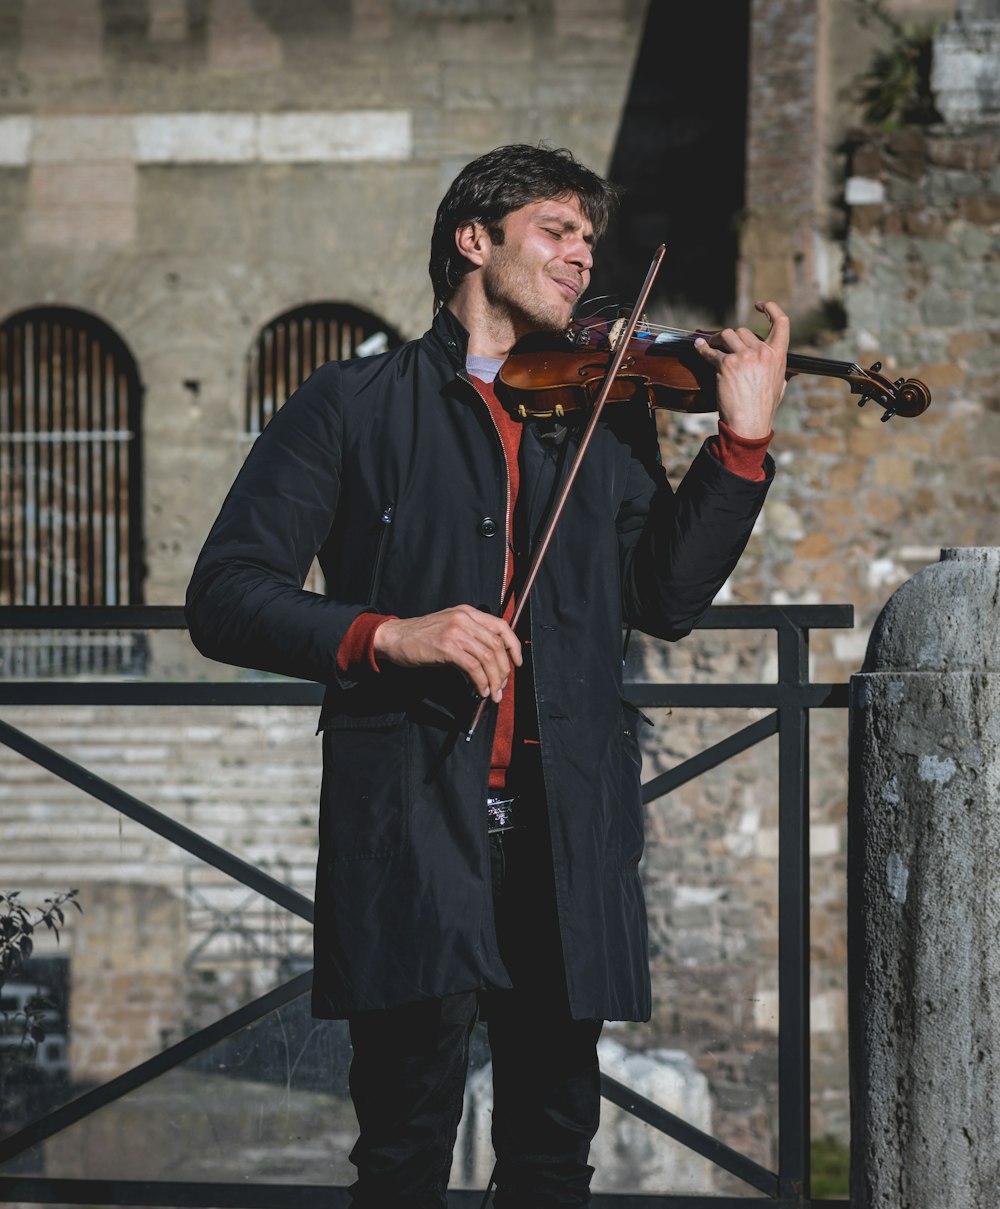 A man in a black coat playing the violet with his eyes closed in front of an old building